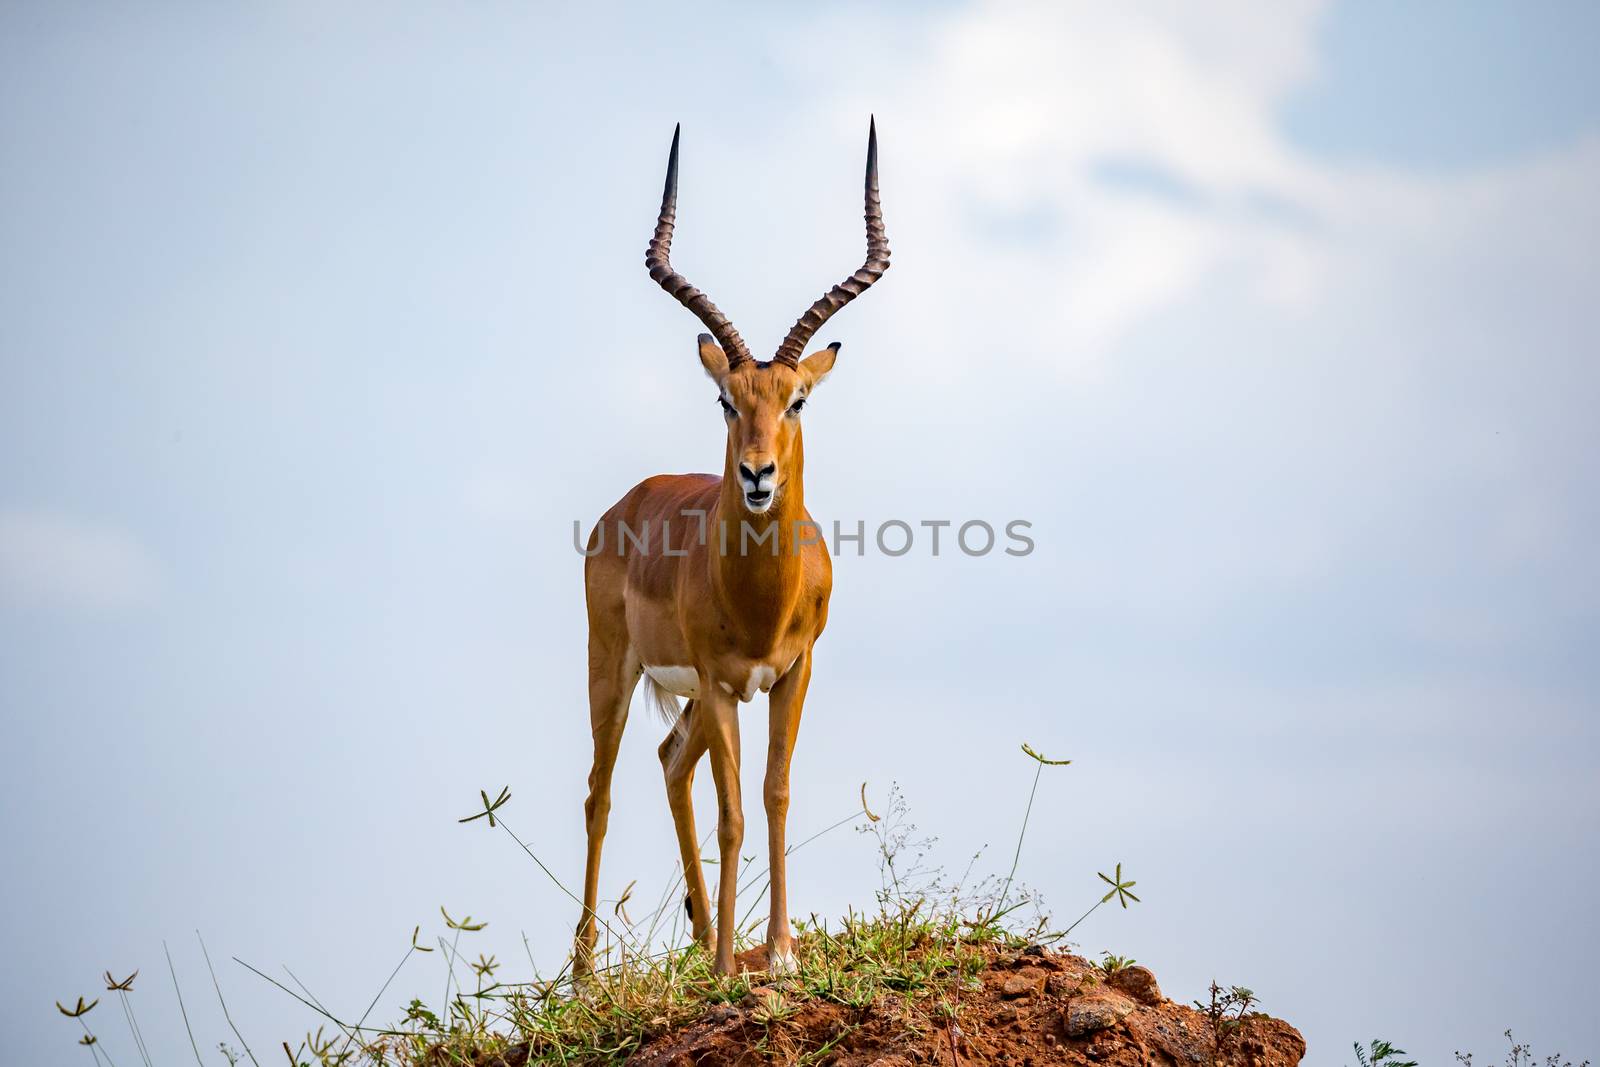 One beautiful antelope with big horns is standing on a hill